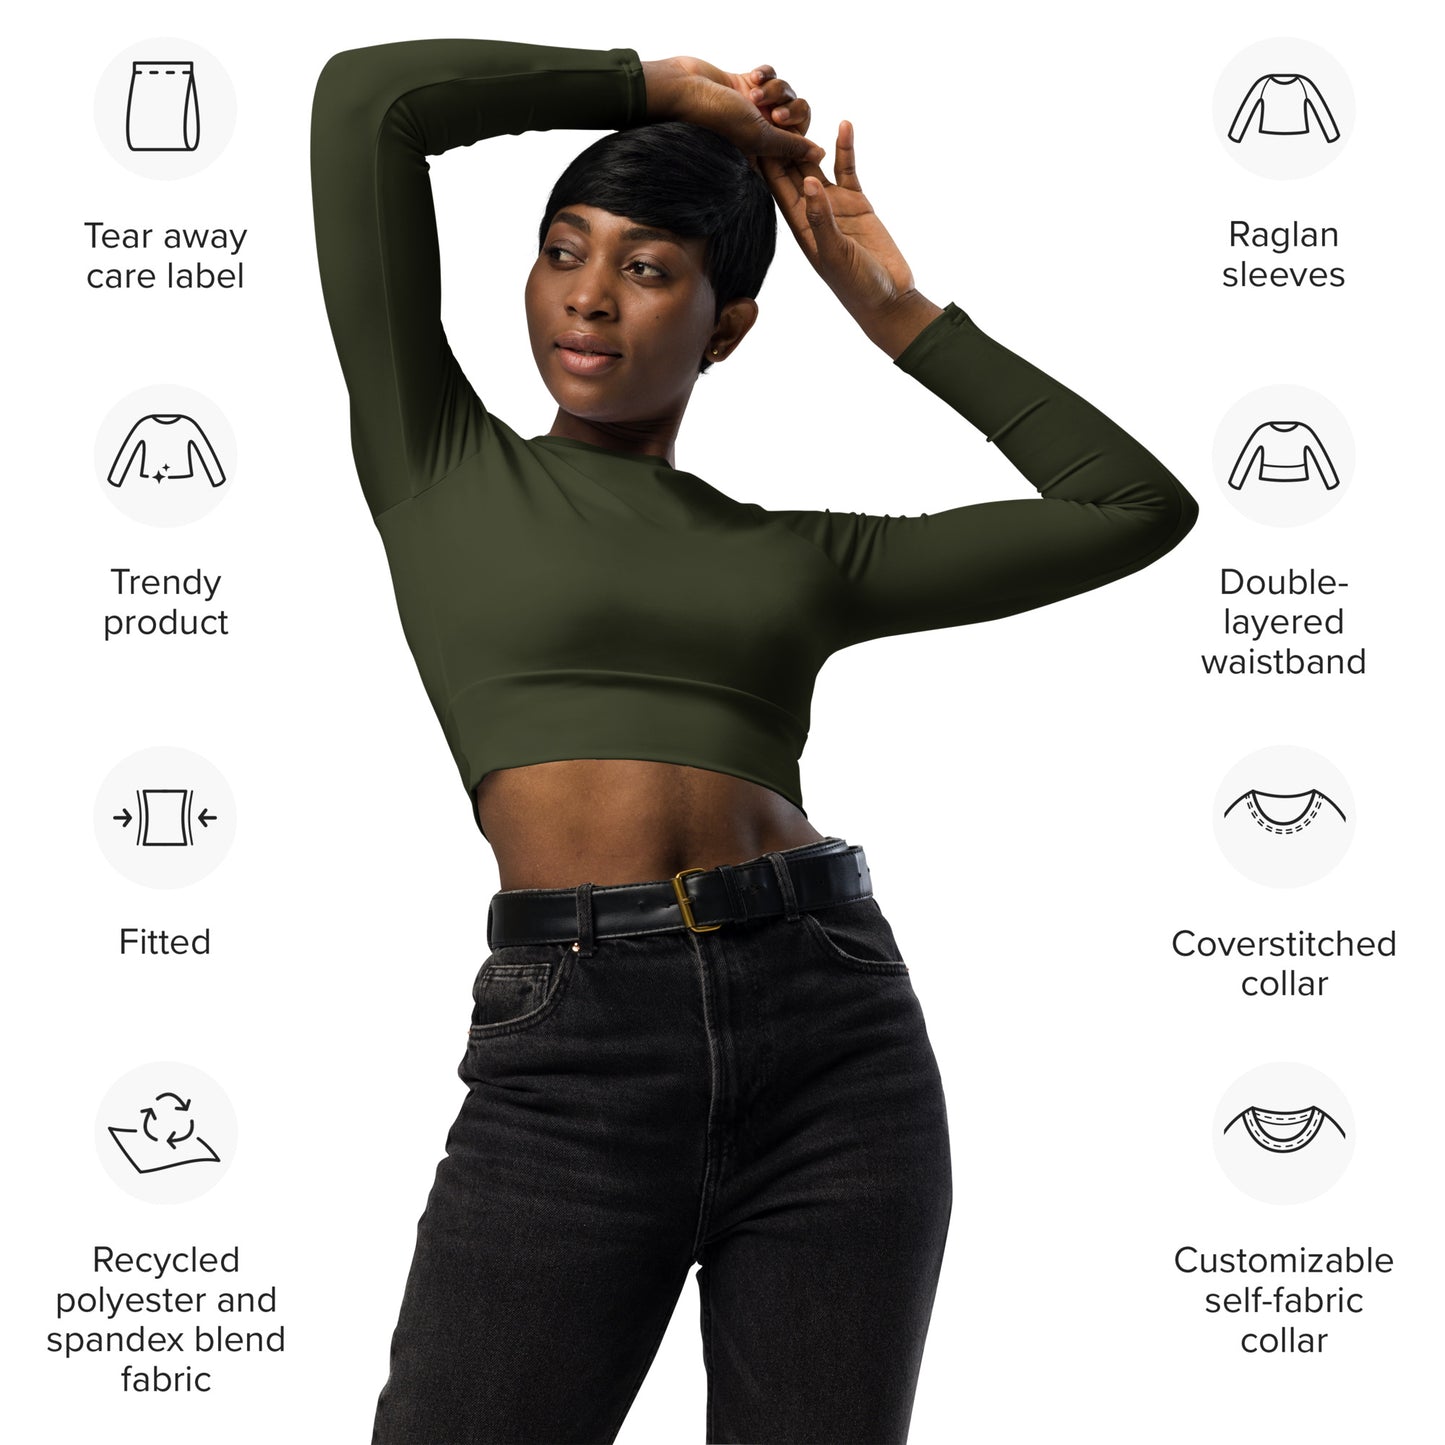 THE ESSENTIAL LONG SLEEVE FITTED CROP TOP OLIVE